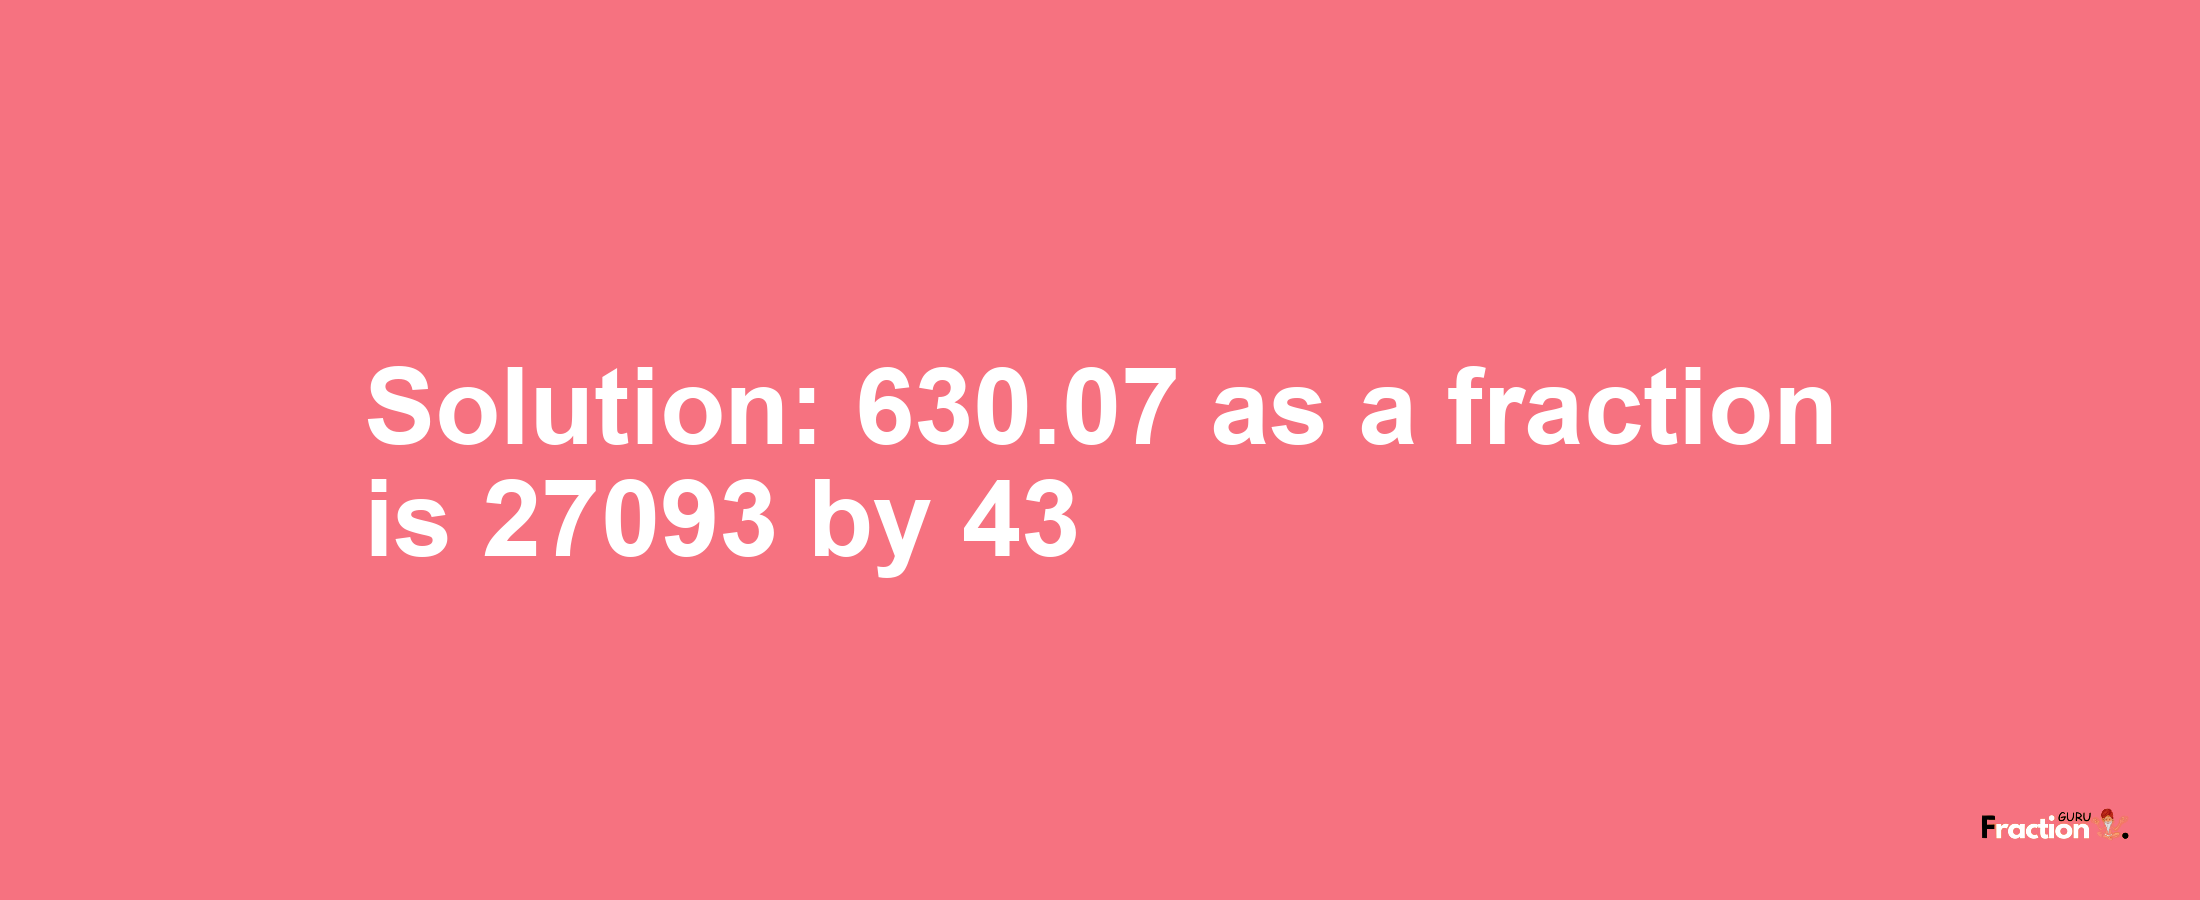 Solution:630.07 as a fraction is 27093/43